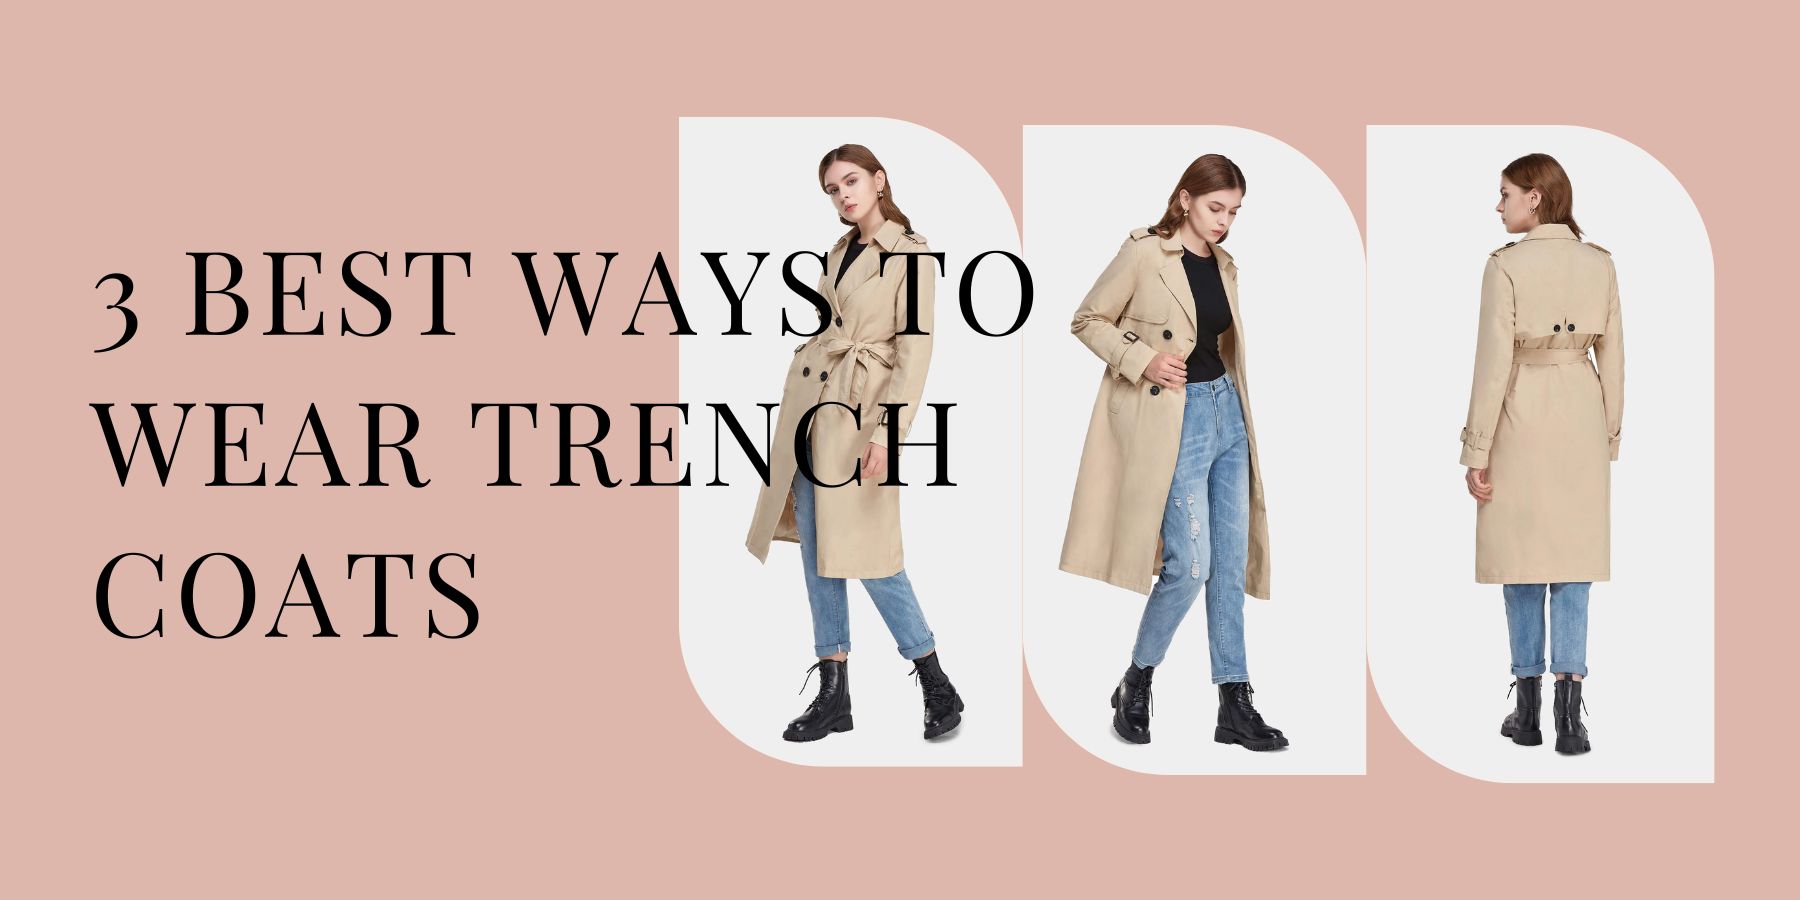 3 Best Ways to Wear Trench Coats : Casual, Formal, and for Work